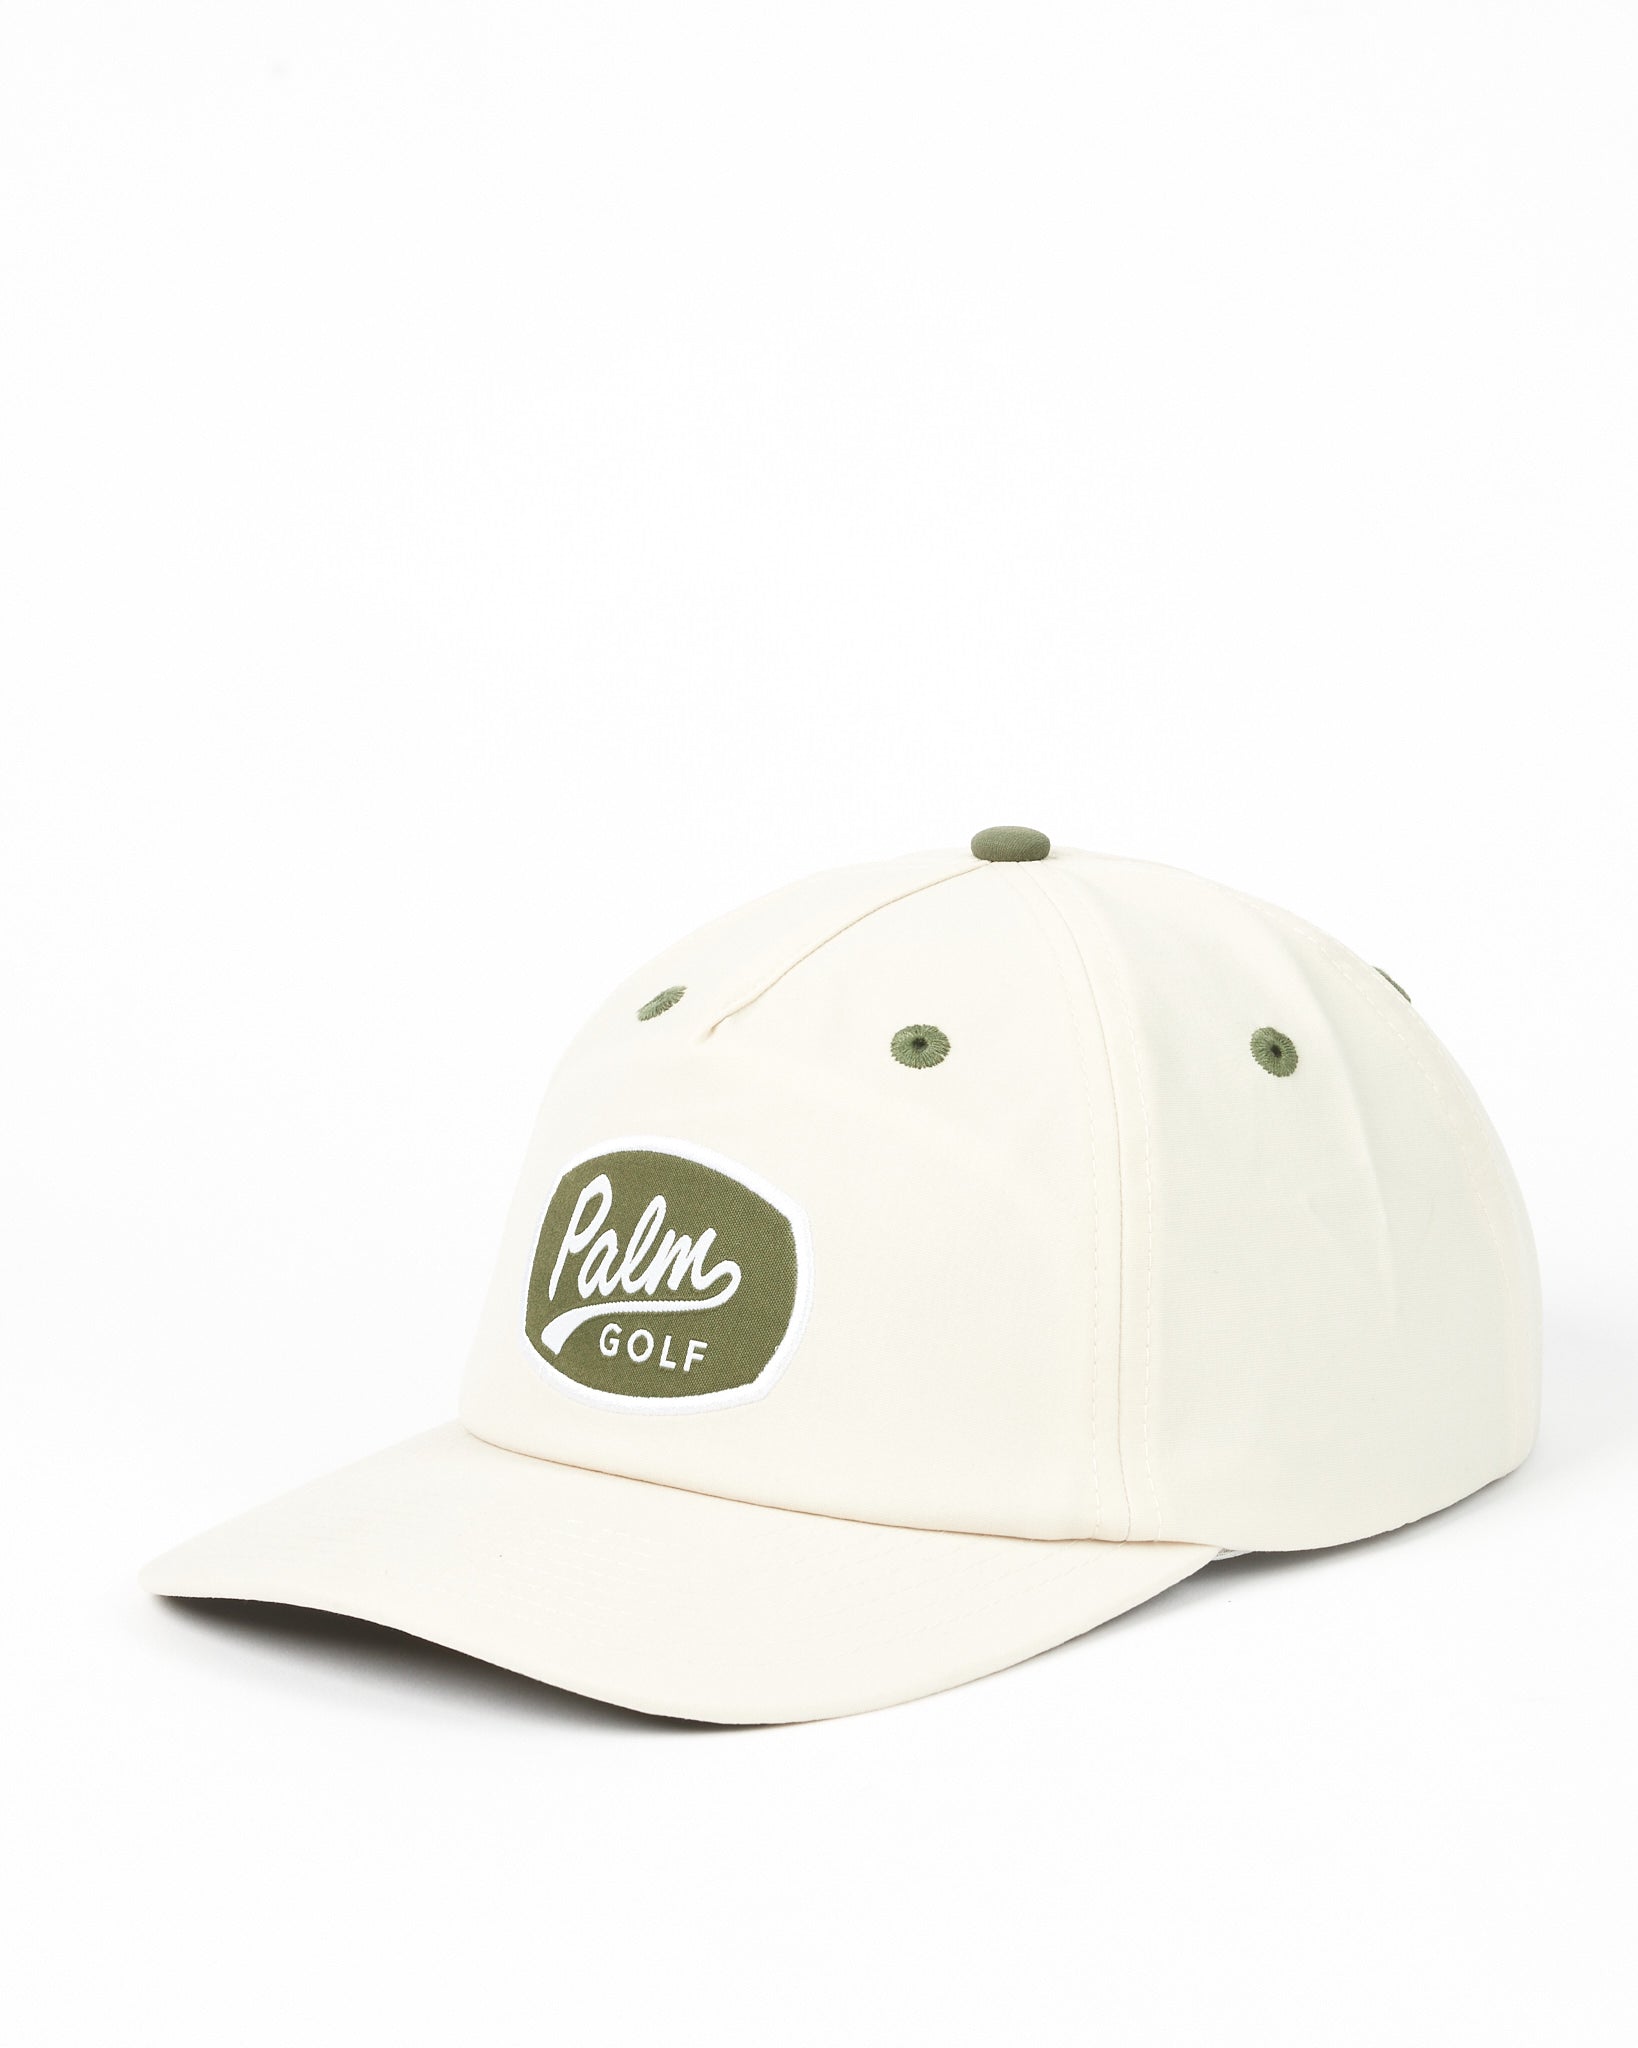 Palm Golf Co. Roadie Snapback (Unstructured)